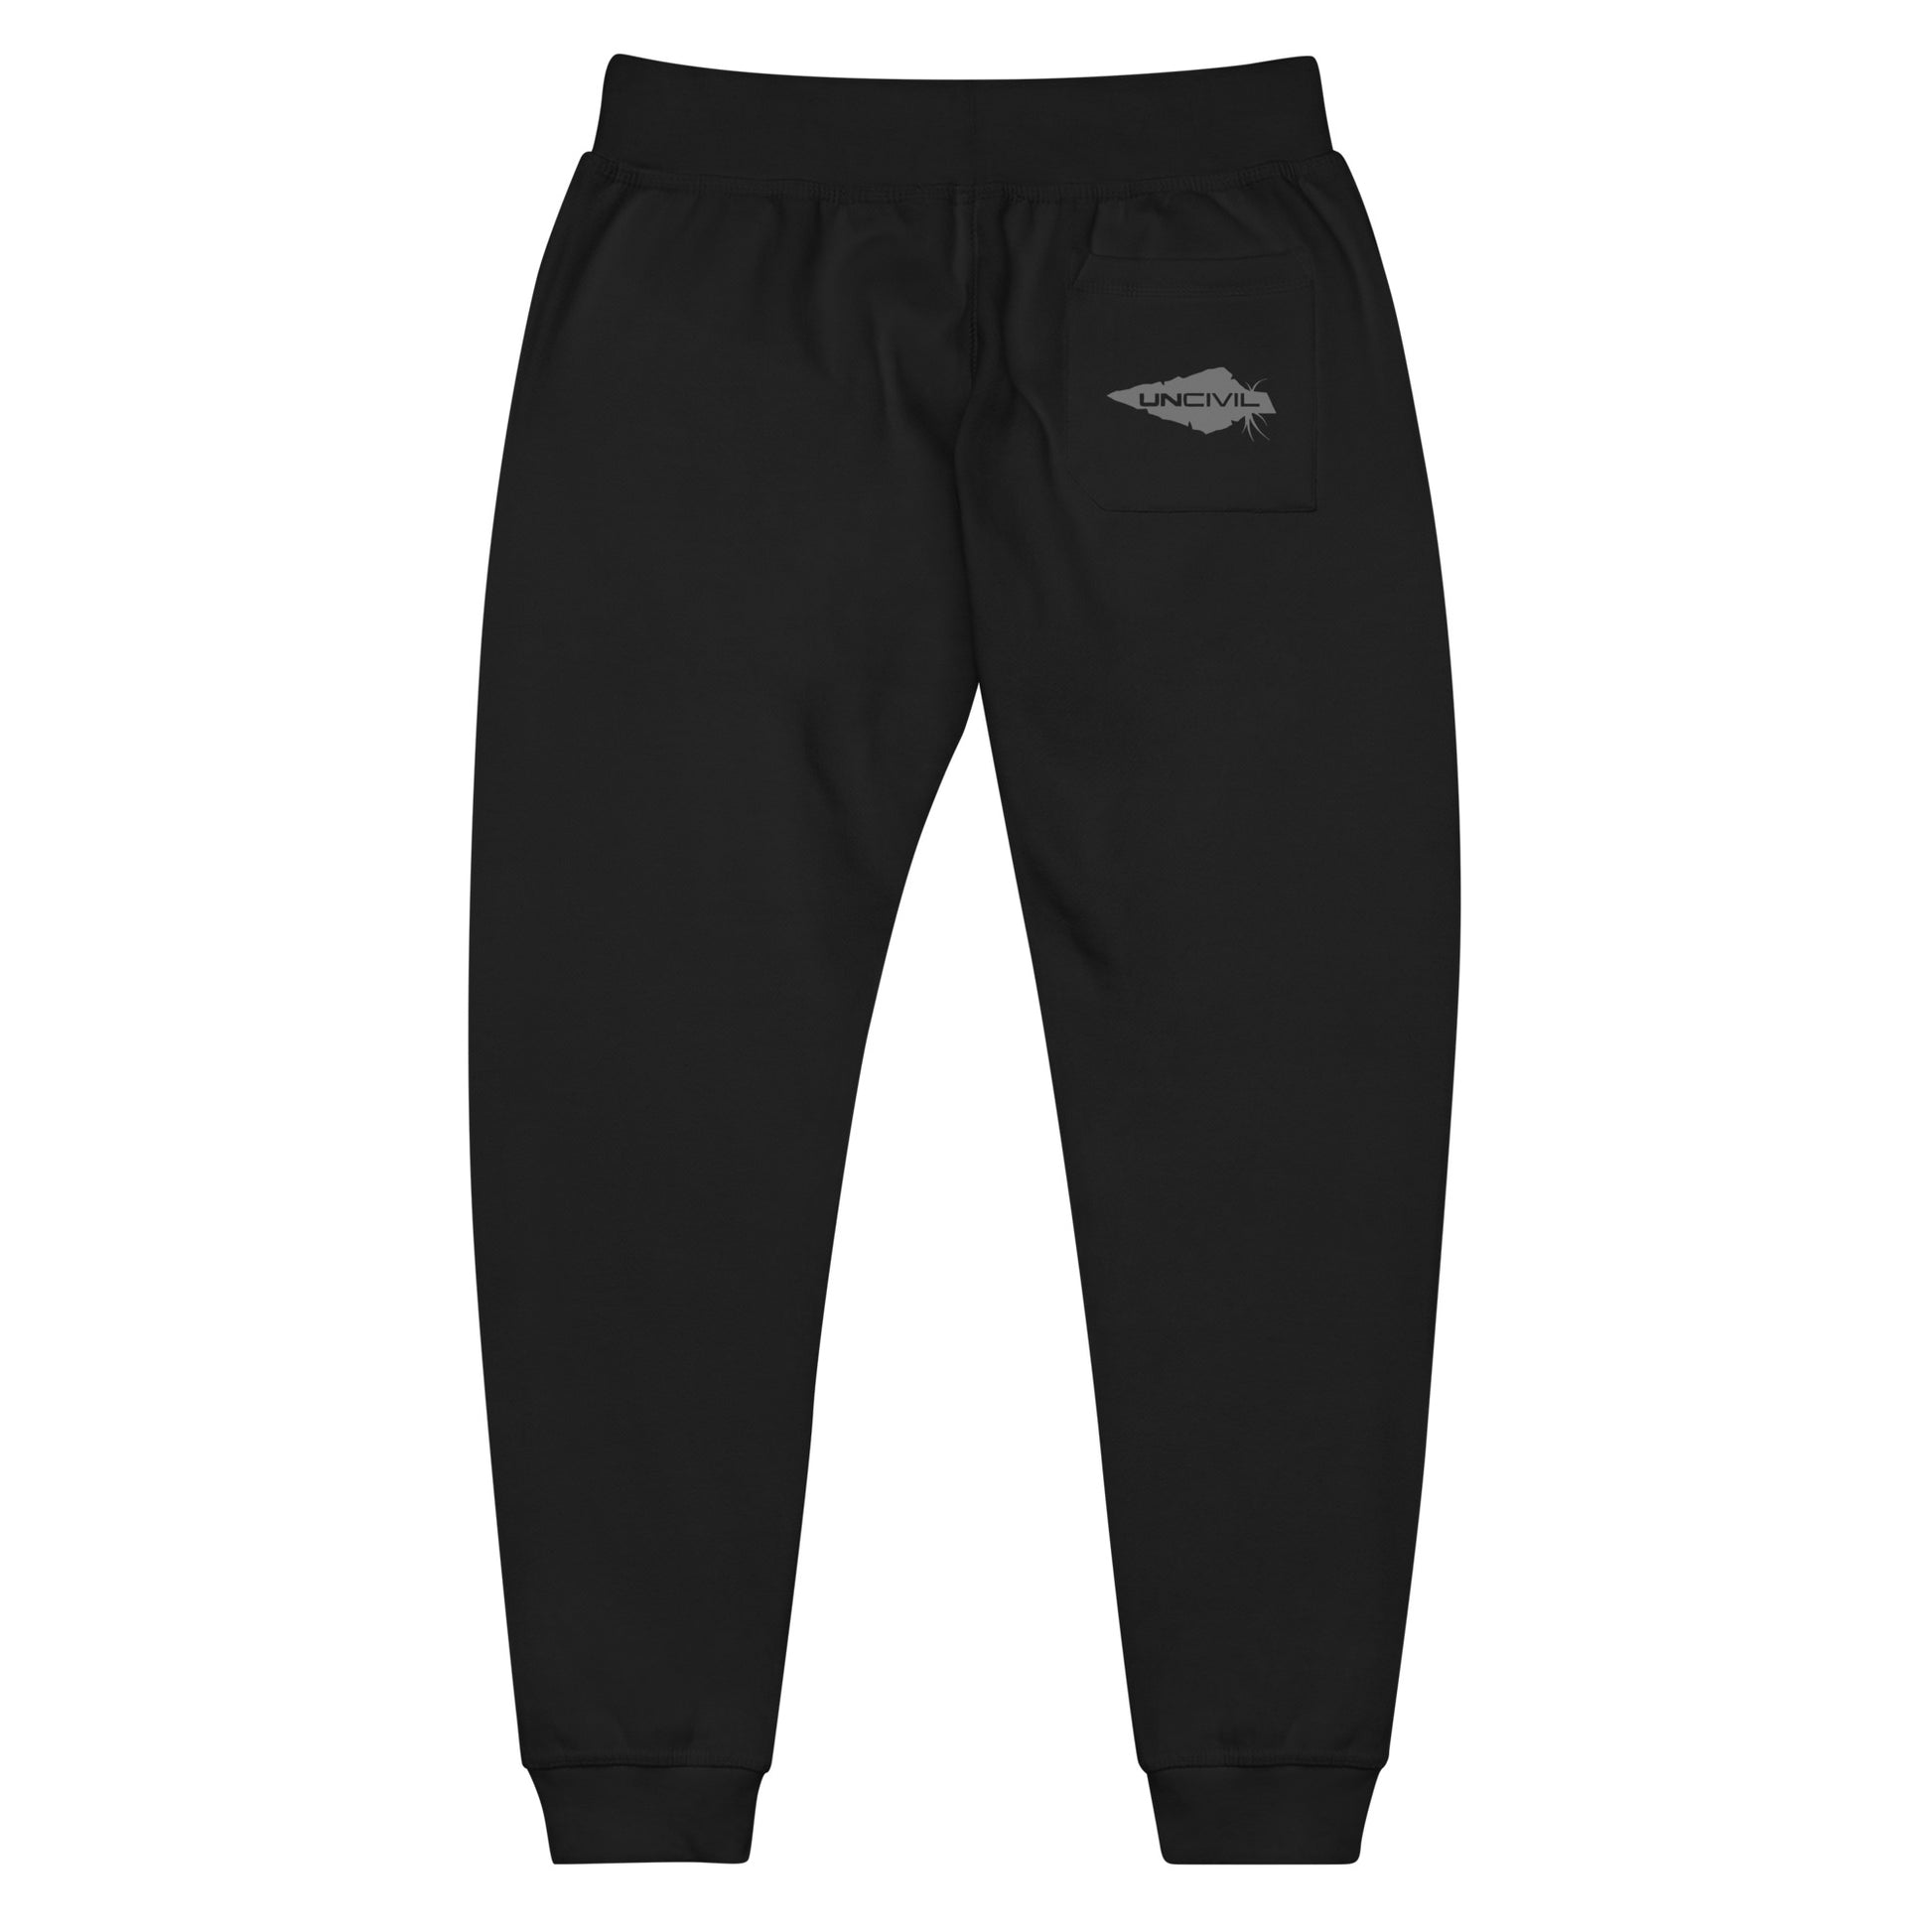 Black sweatpants, UNCIVIL on front left leg and UNCIVIL patch on the back right pocket.